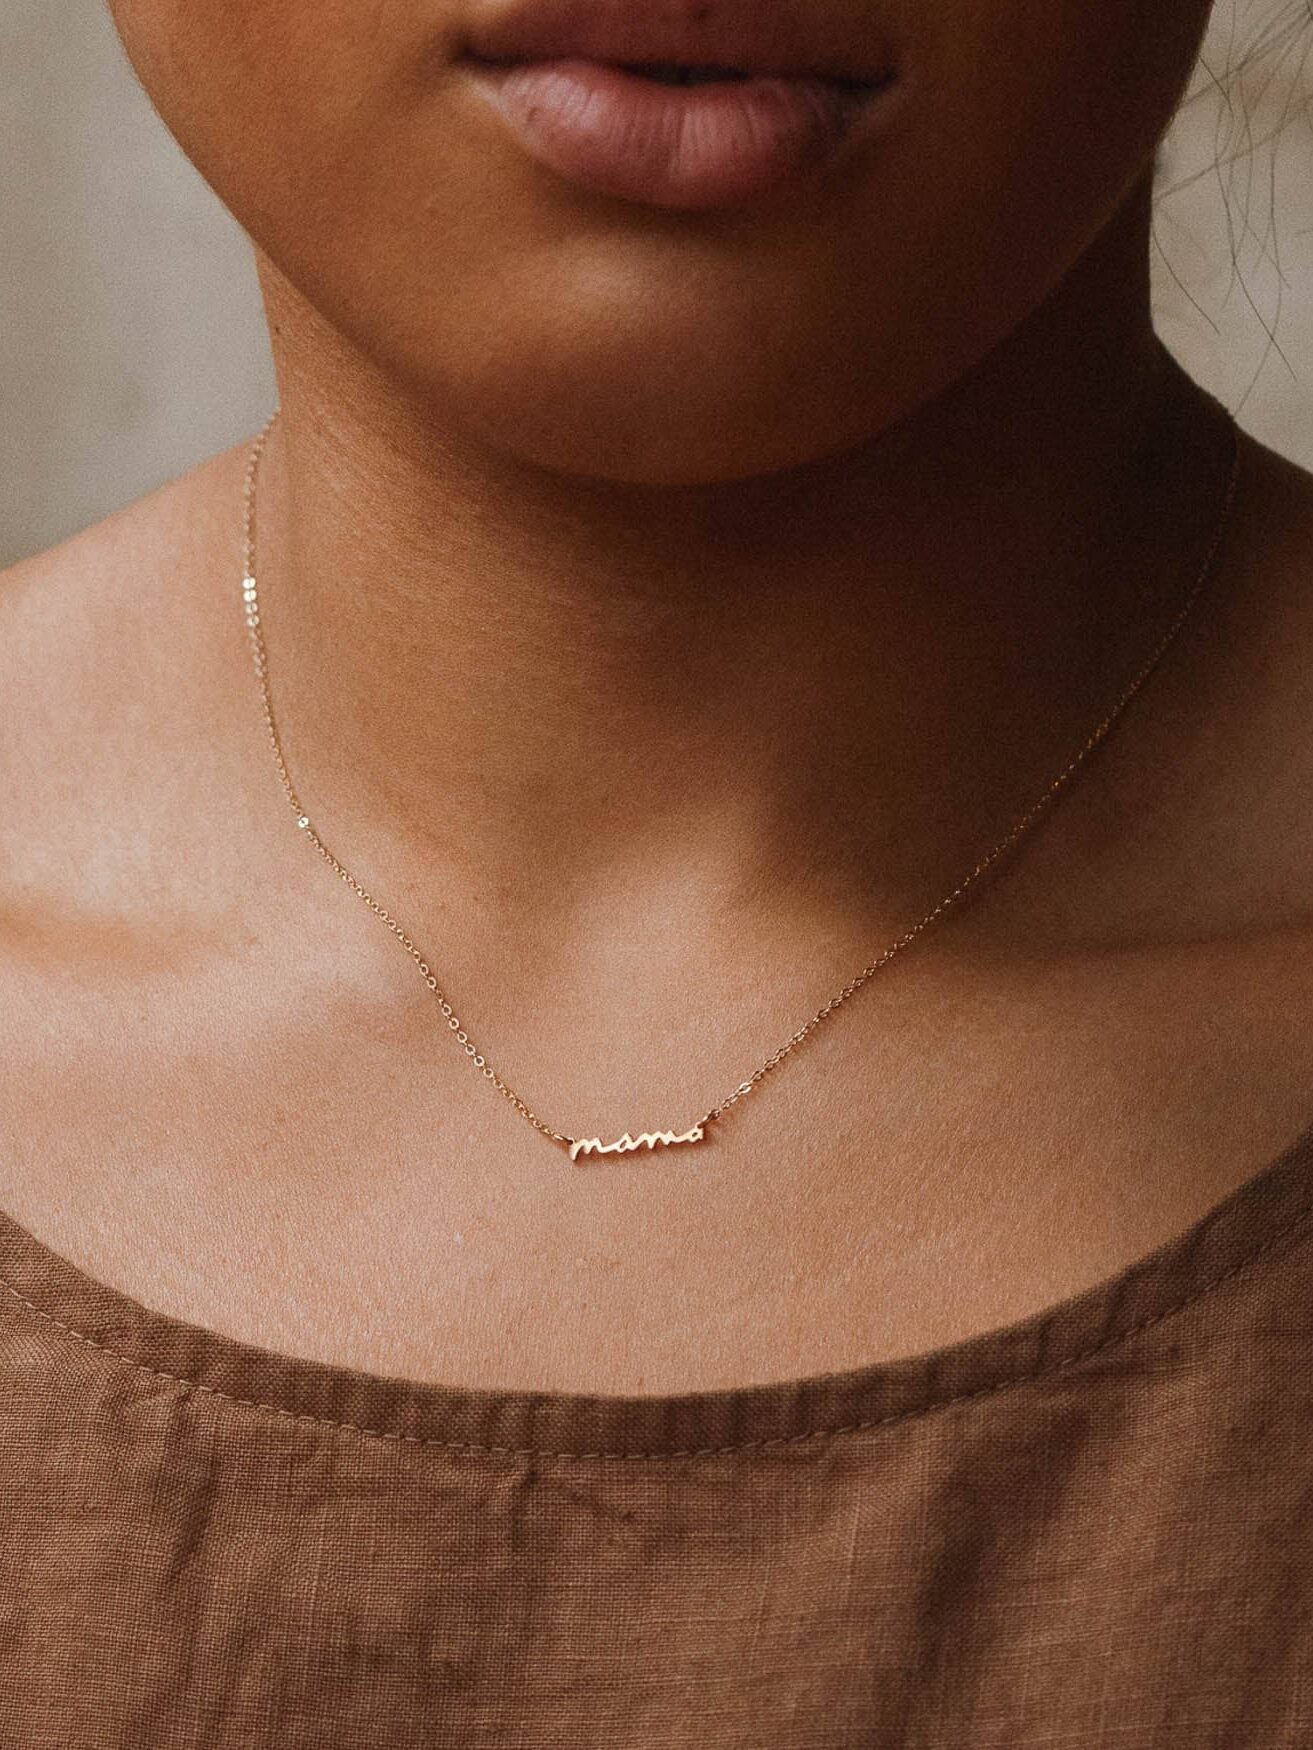 GLDN gold "mama" necklace on a model.